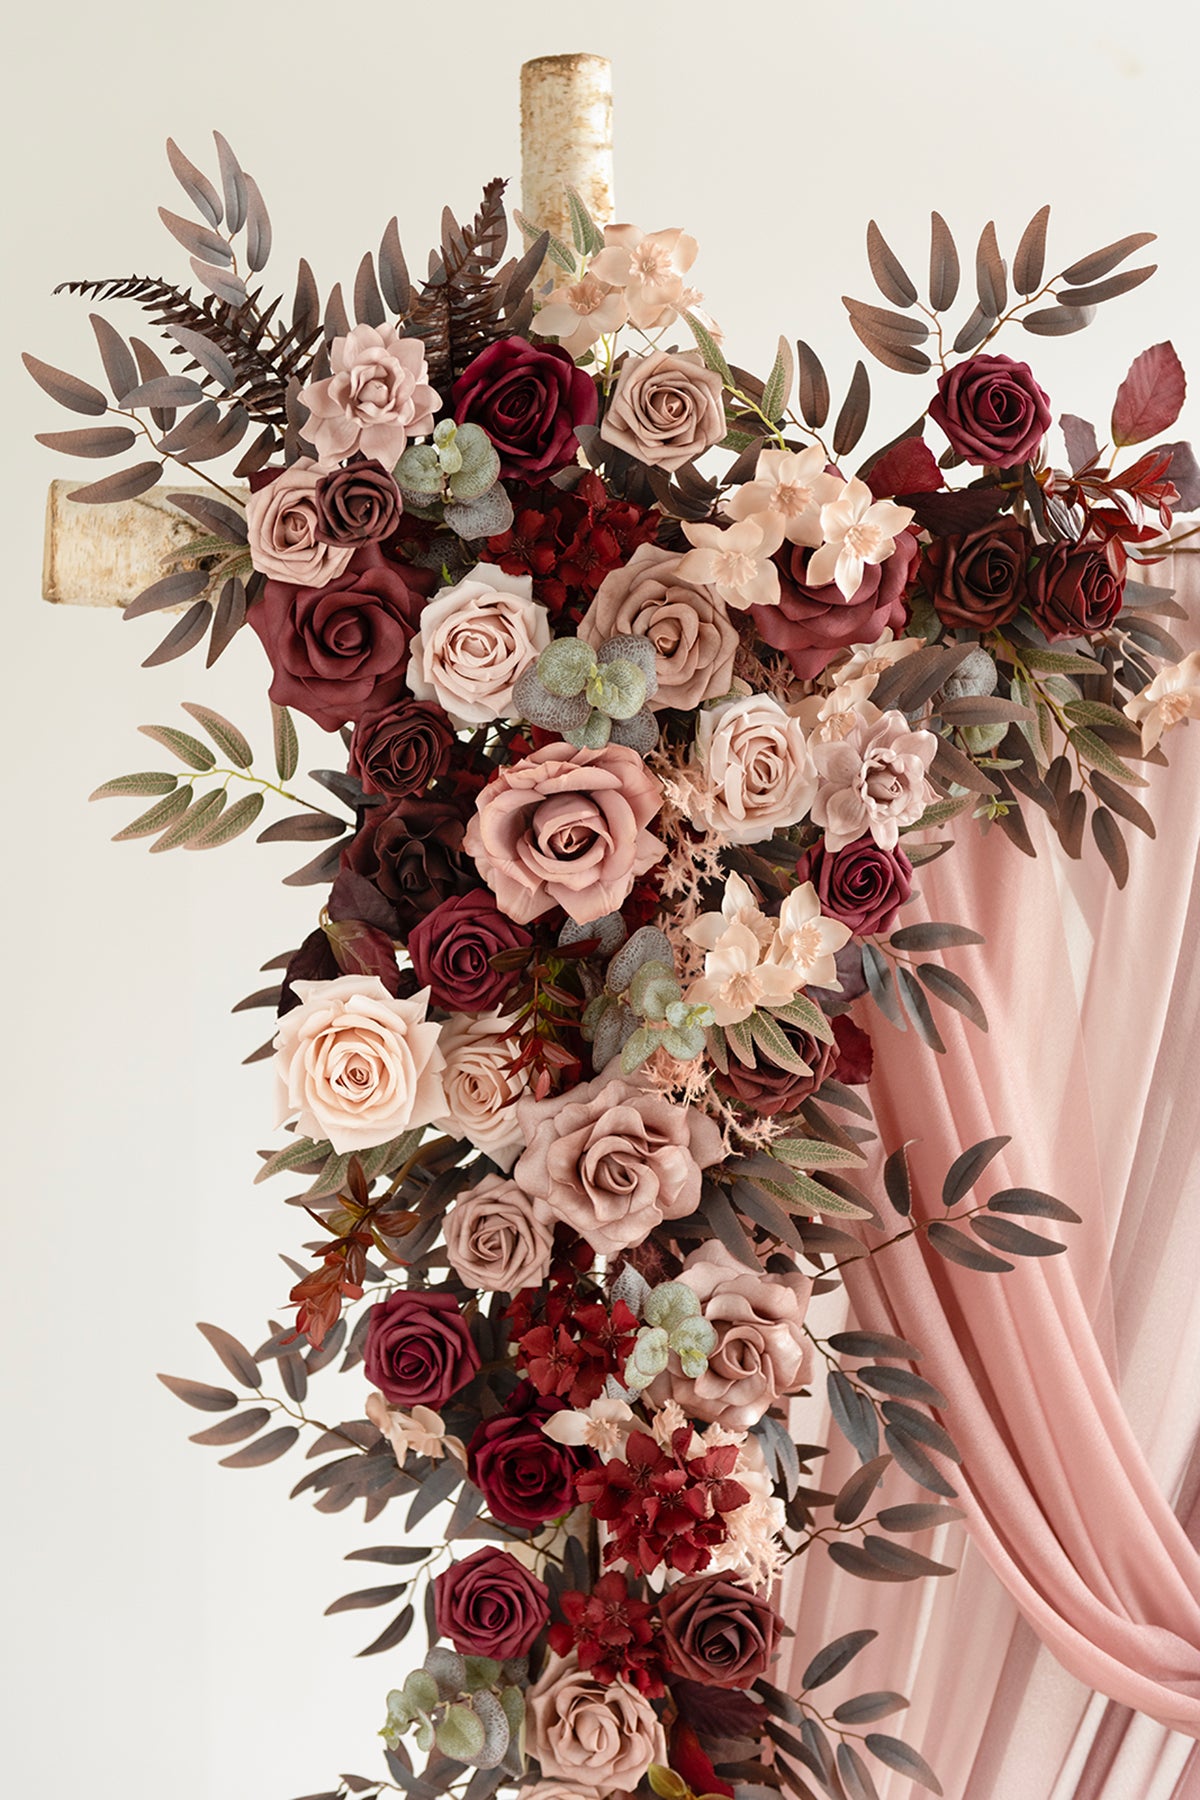 Flower Arch Decor with Drapes in Burgundy & Dusty Rose | Clearance